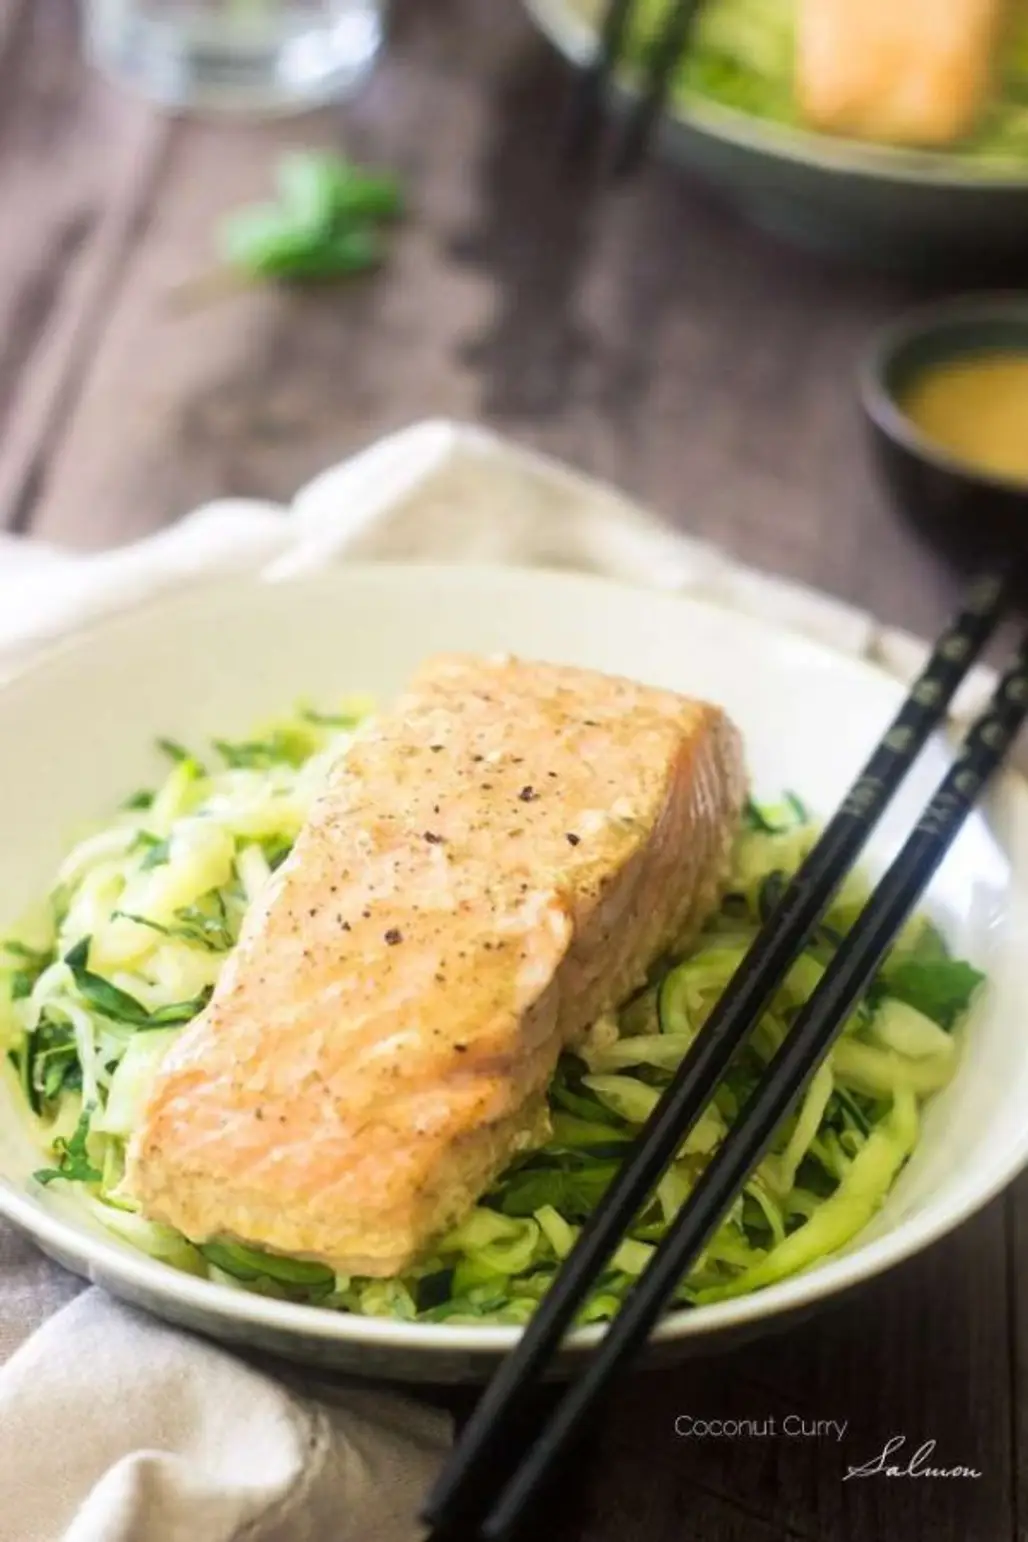 Zucchini Noodles with Coconut Curry Salmon